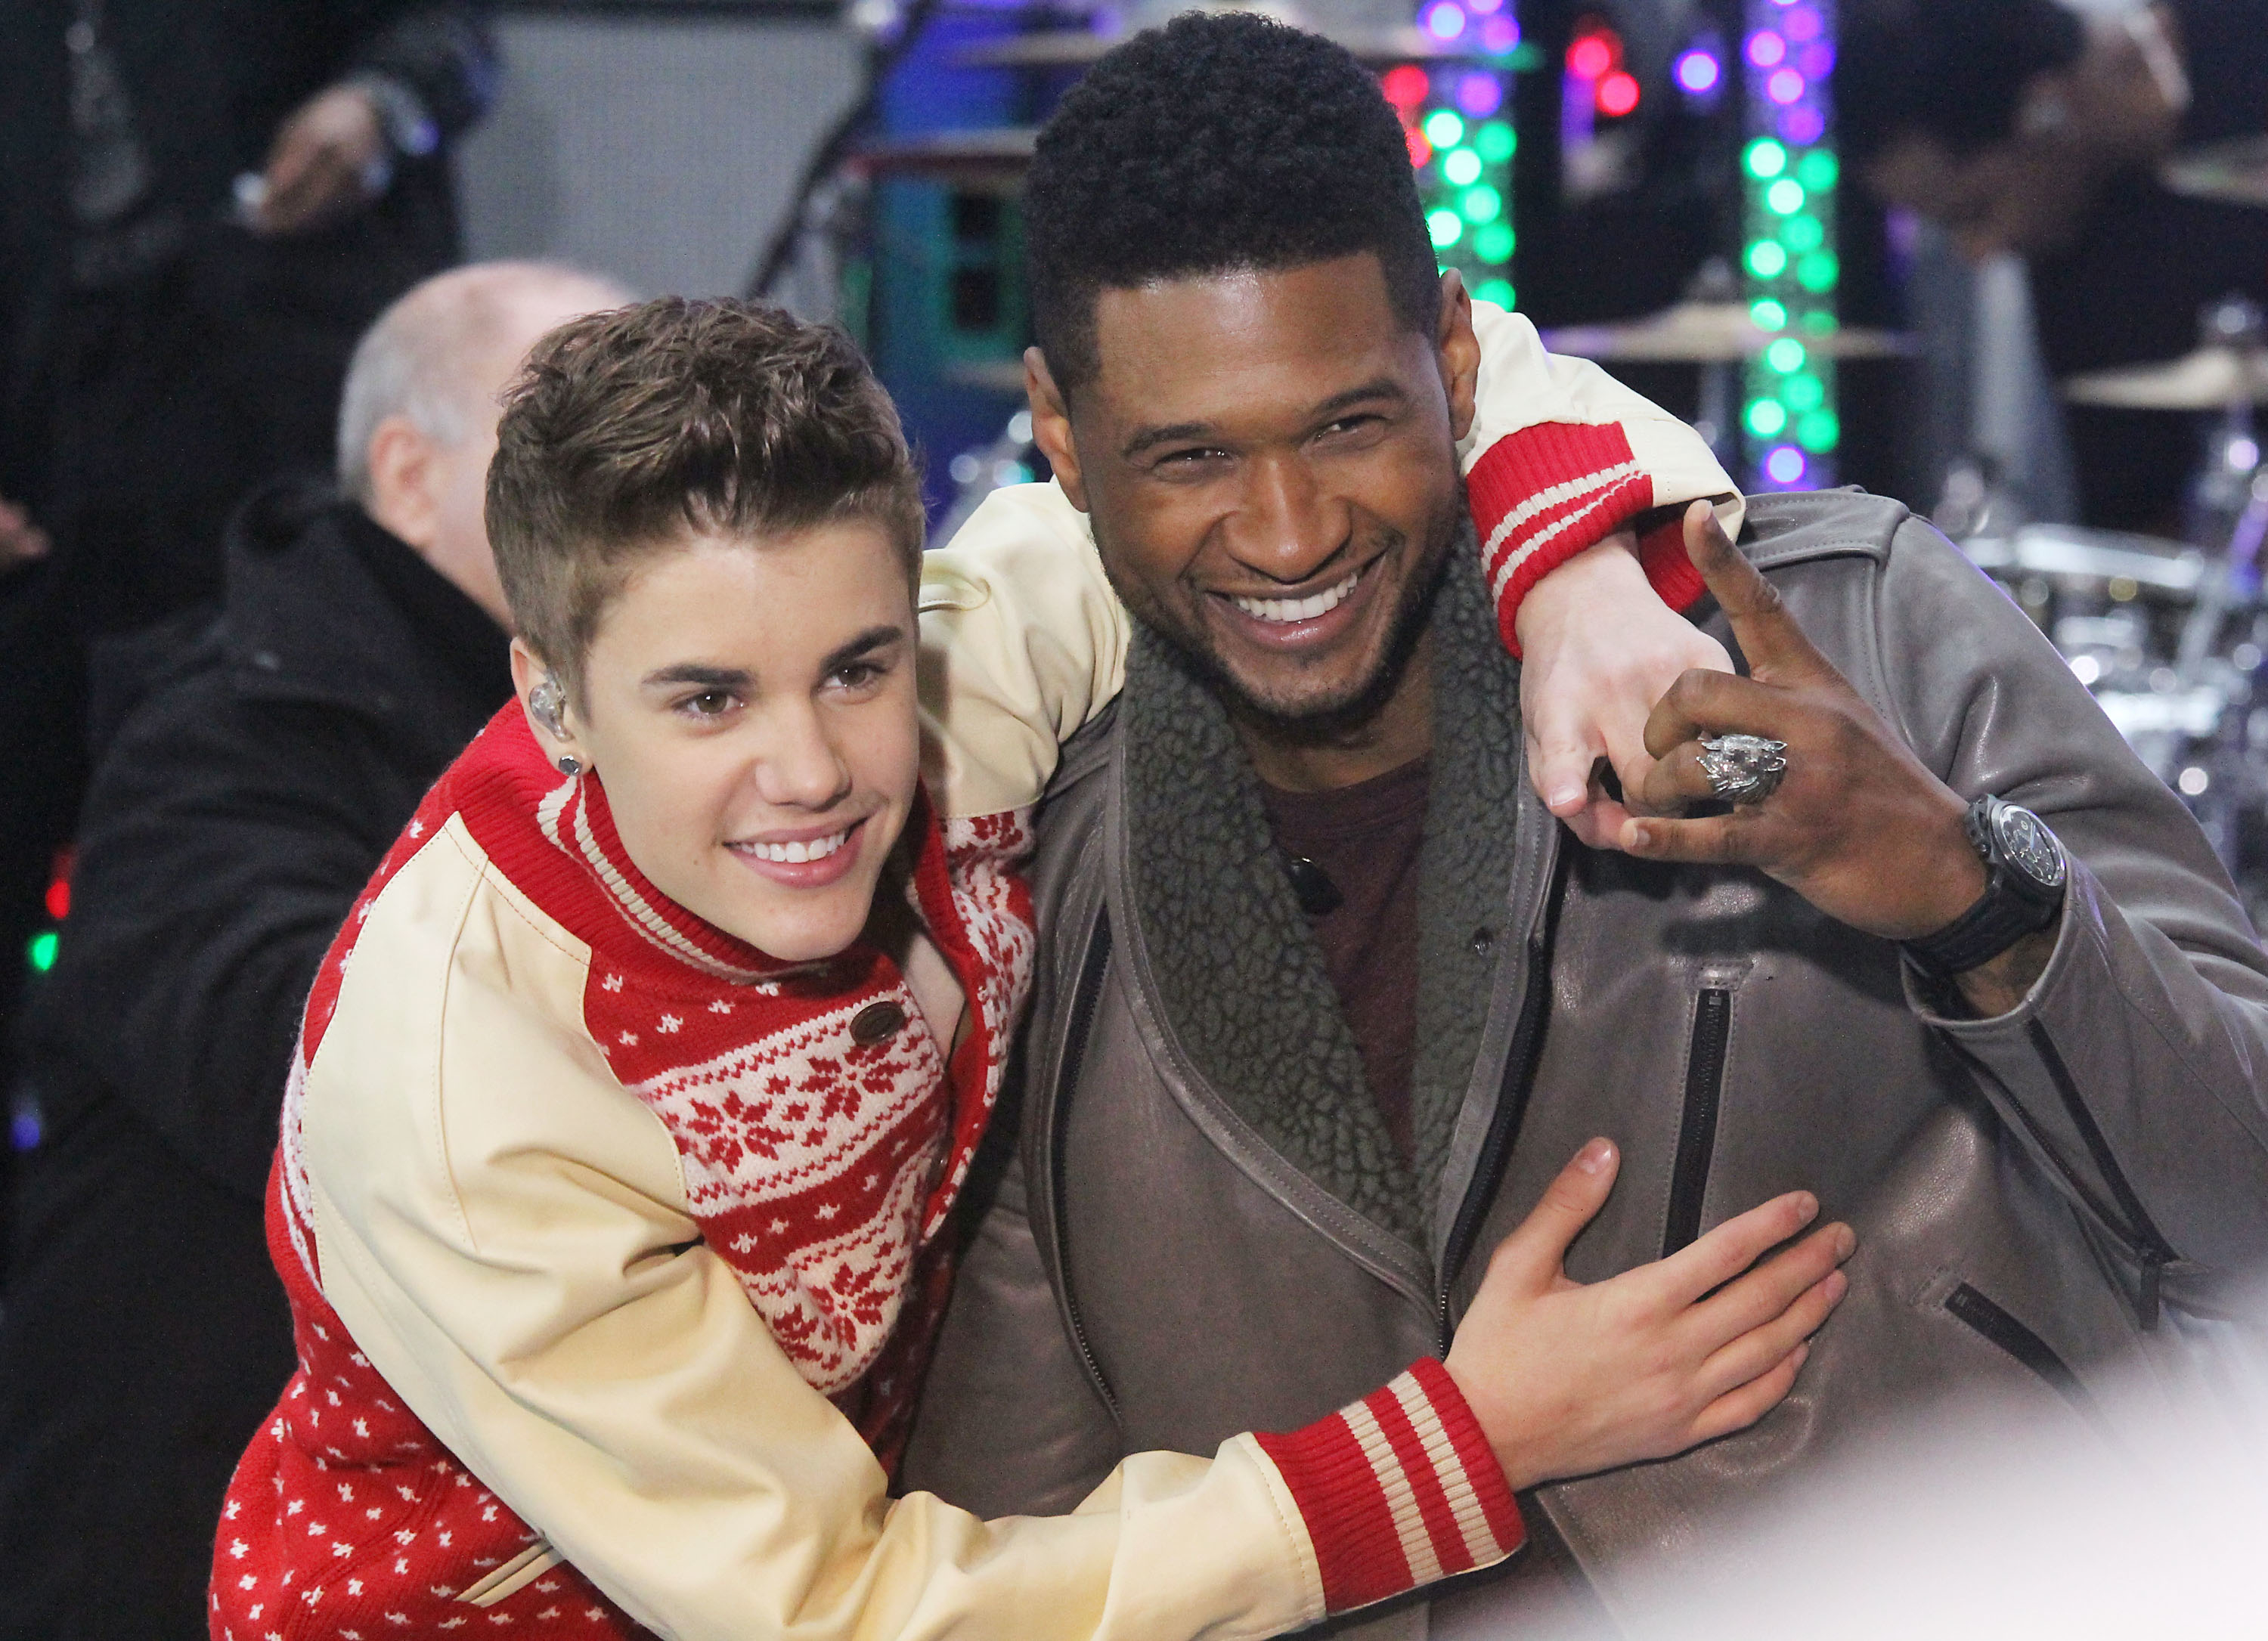 Justin Bieber in a holiday sweater poses with Usher, his arms around him